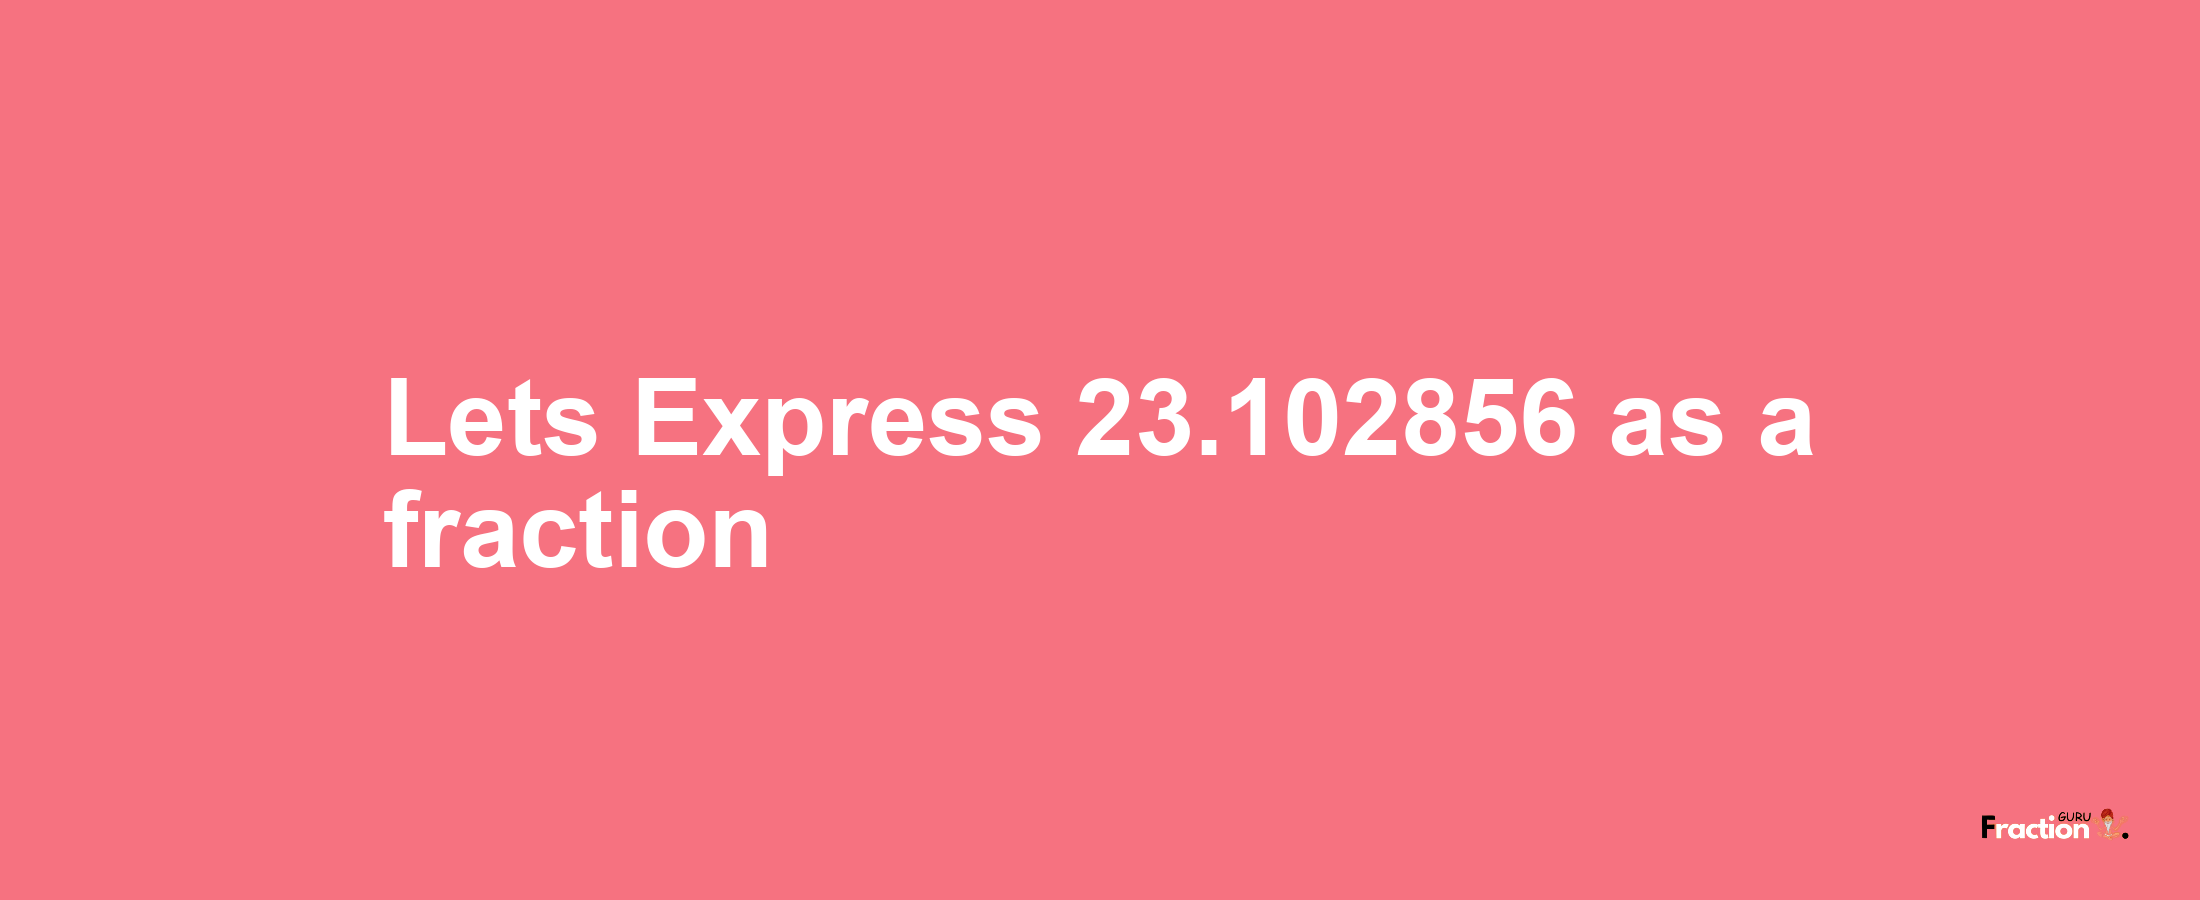 Lets Express 23.102856 as afraction